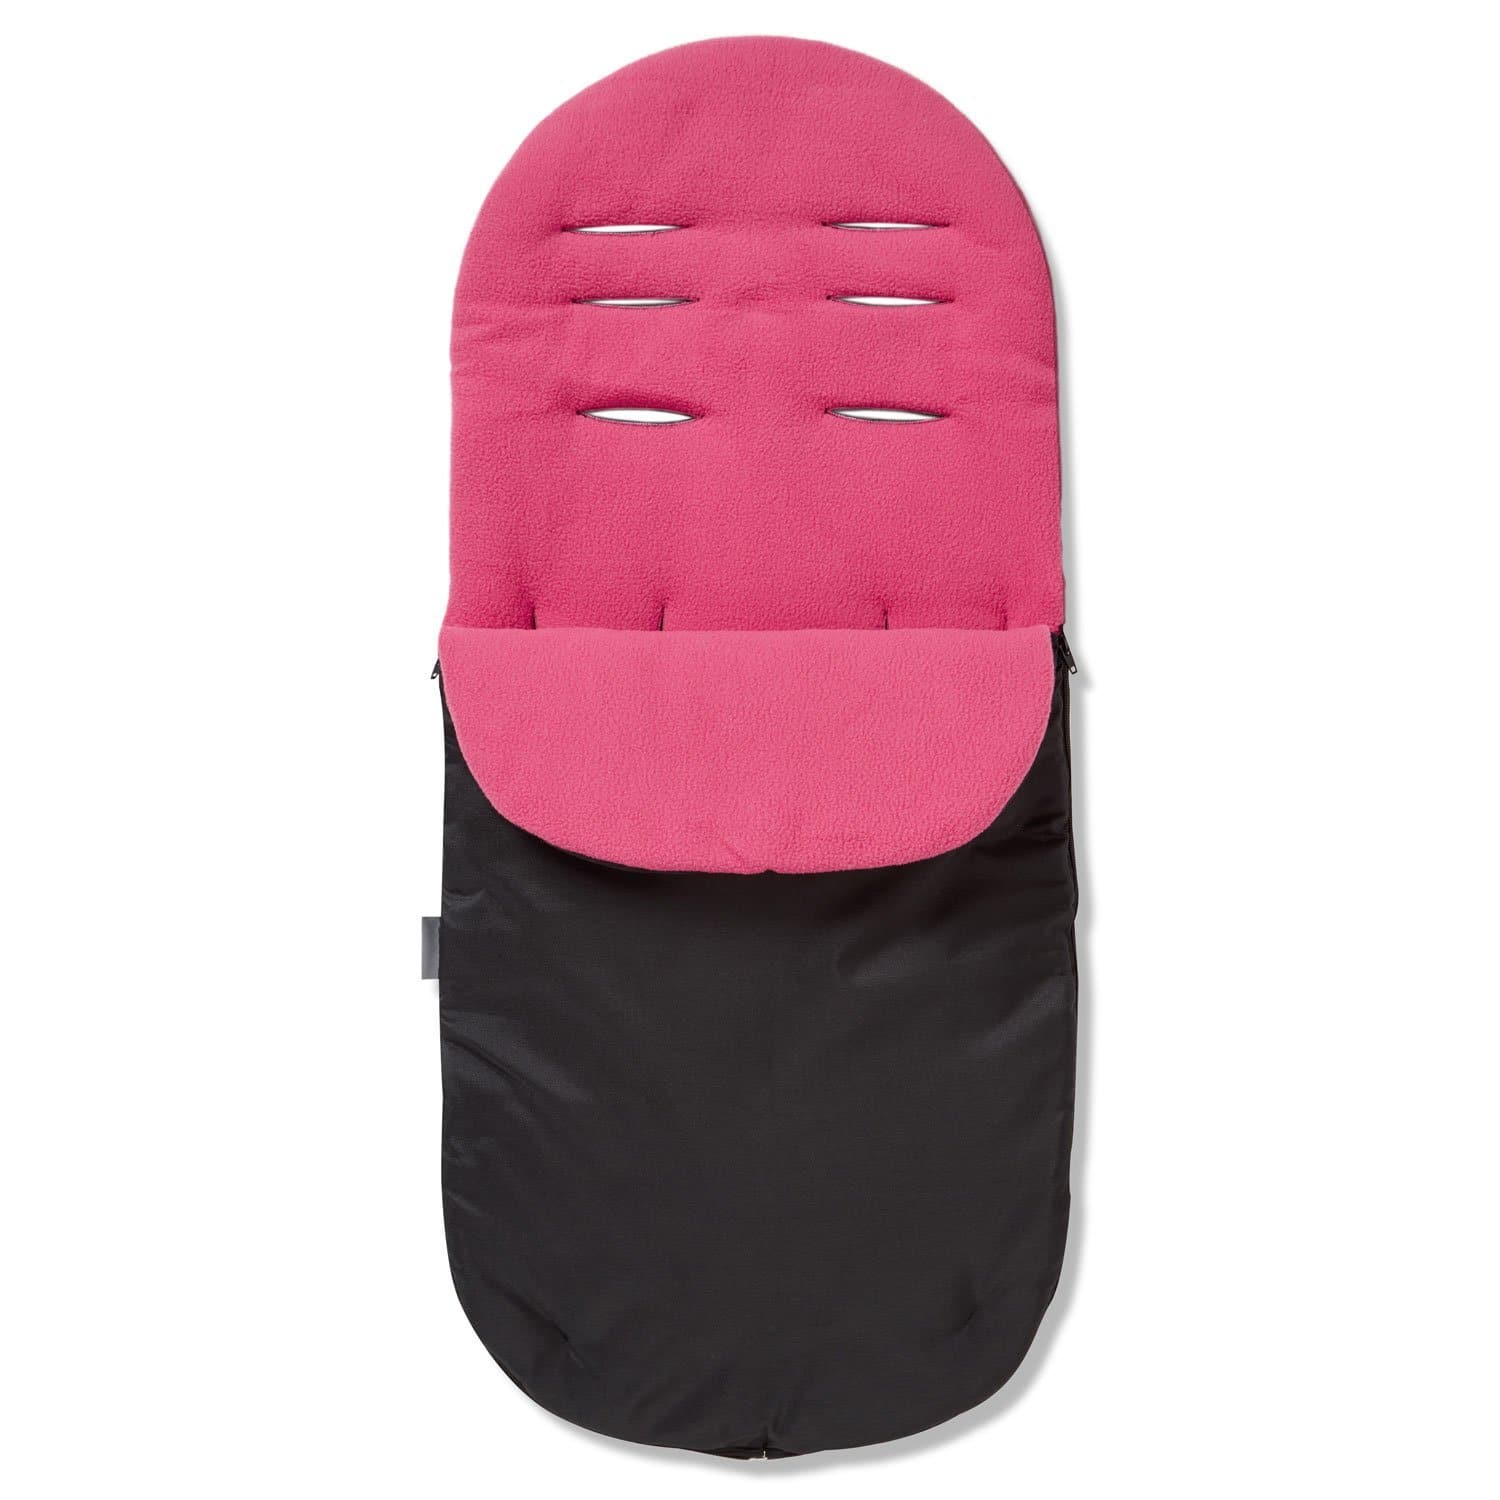 Footmuff / Cosy Toes Compatible with Casual - For Your Little One